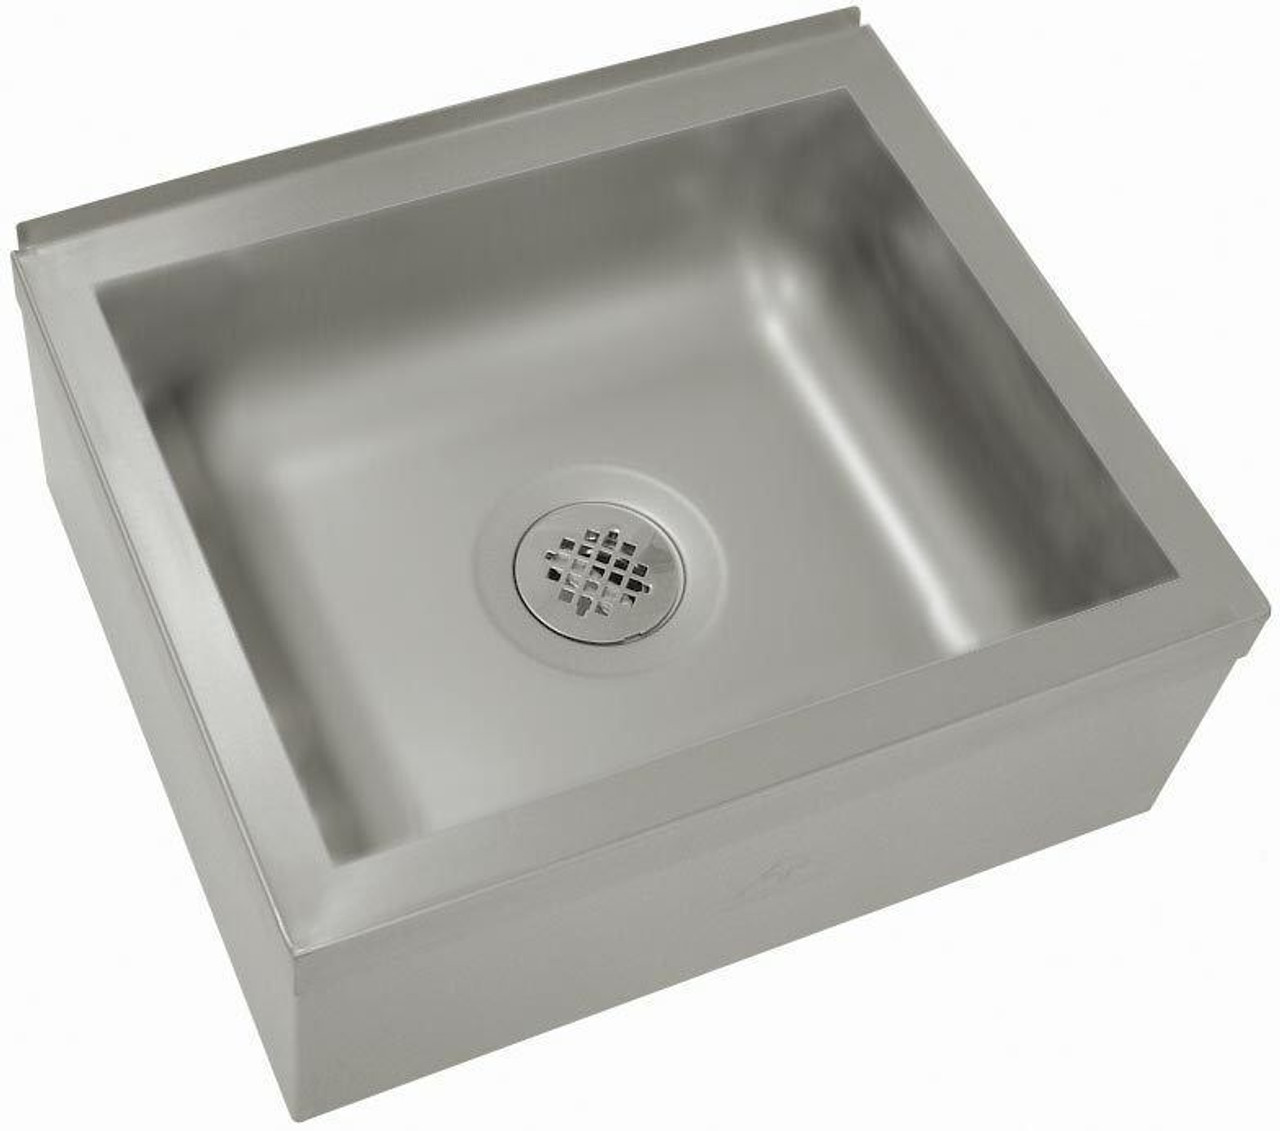 Floor Mounted Mop Sink  33"W x 25"D x 10"H, Bowl Size: 20" x 28"